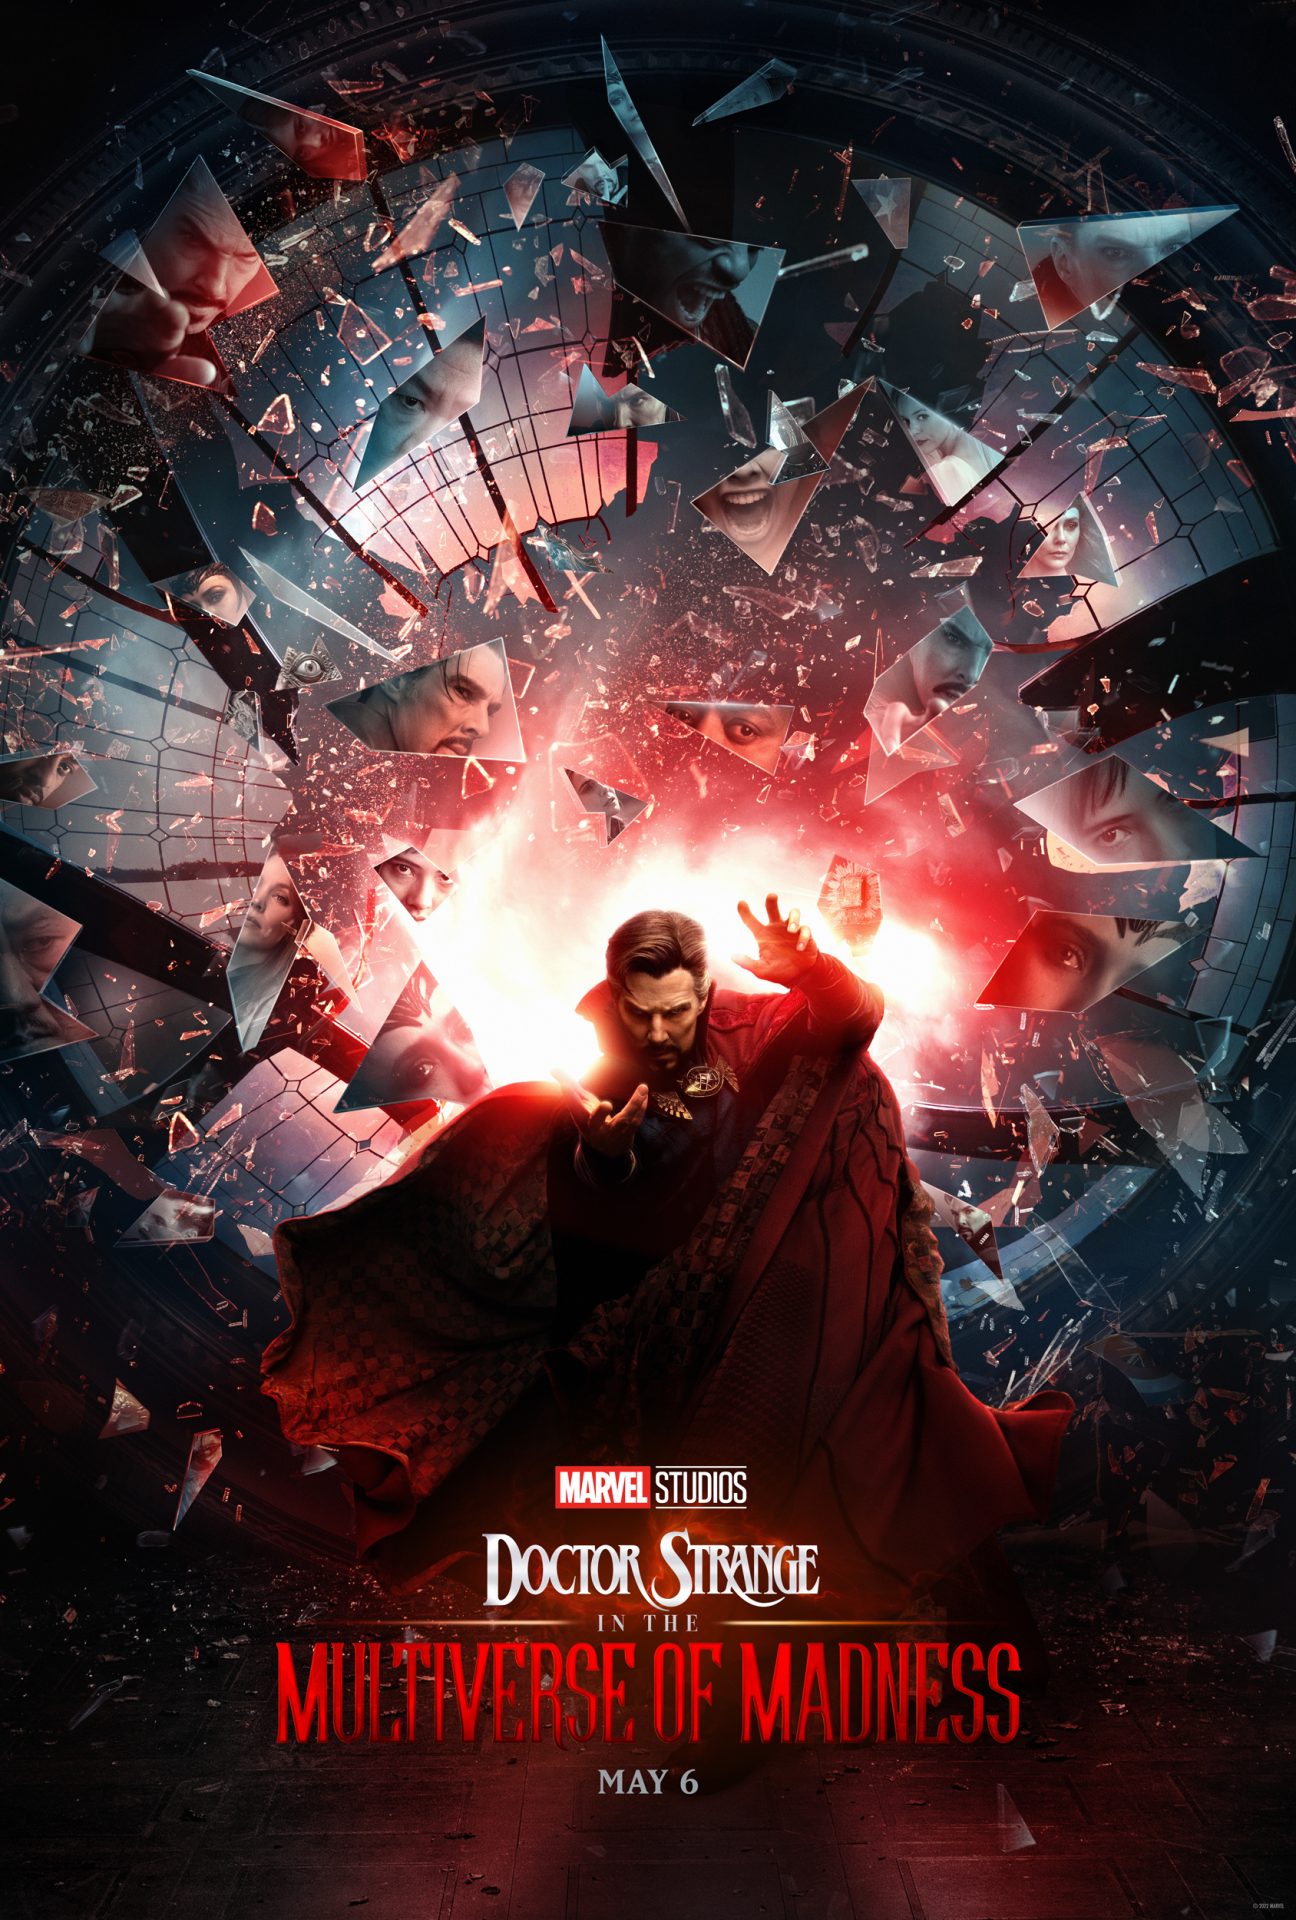 First movie poster released for Doctor Strange in the Multiverse of Madness